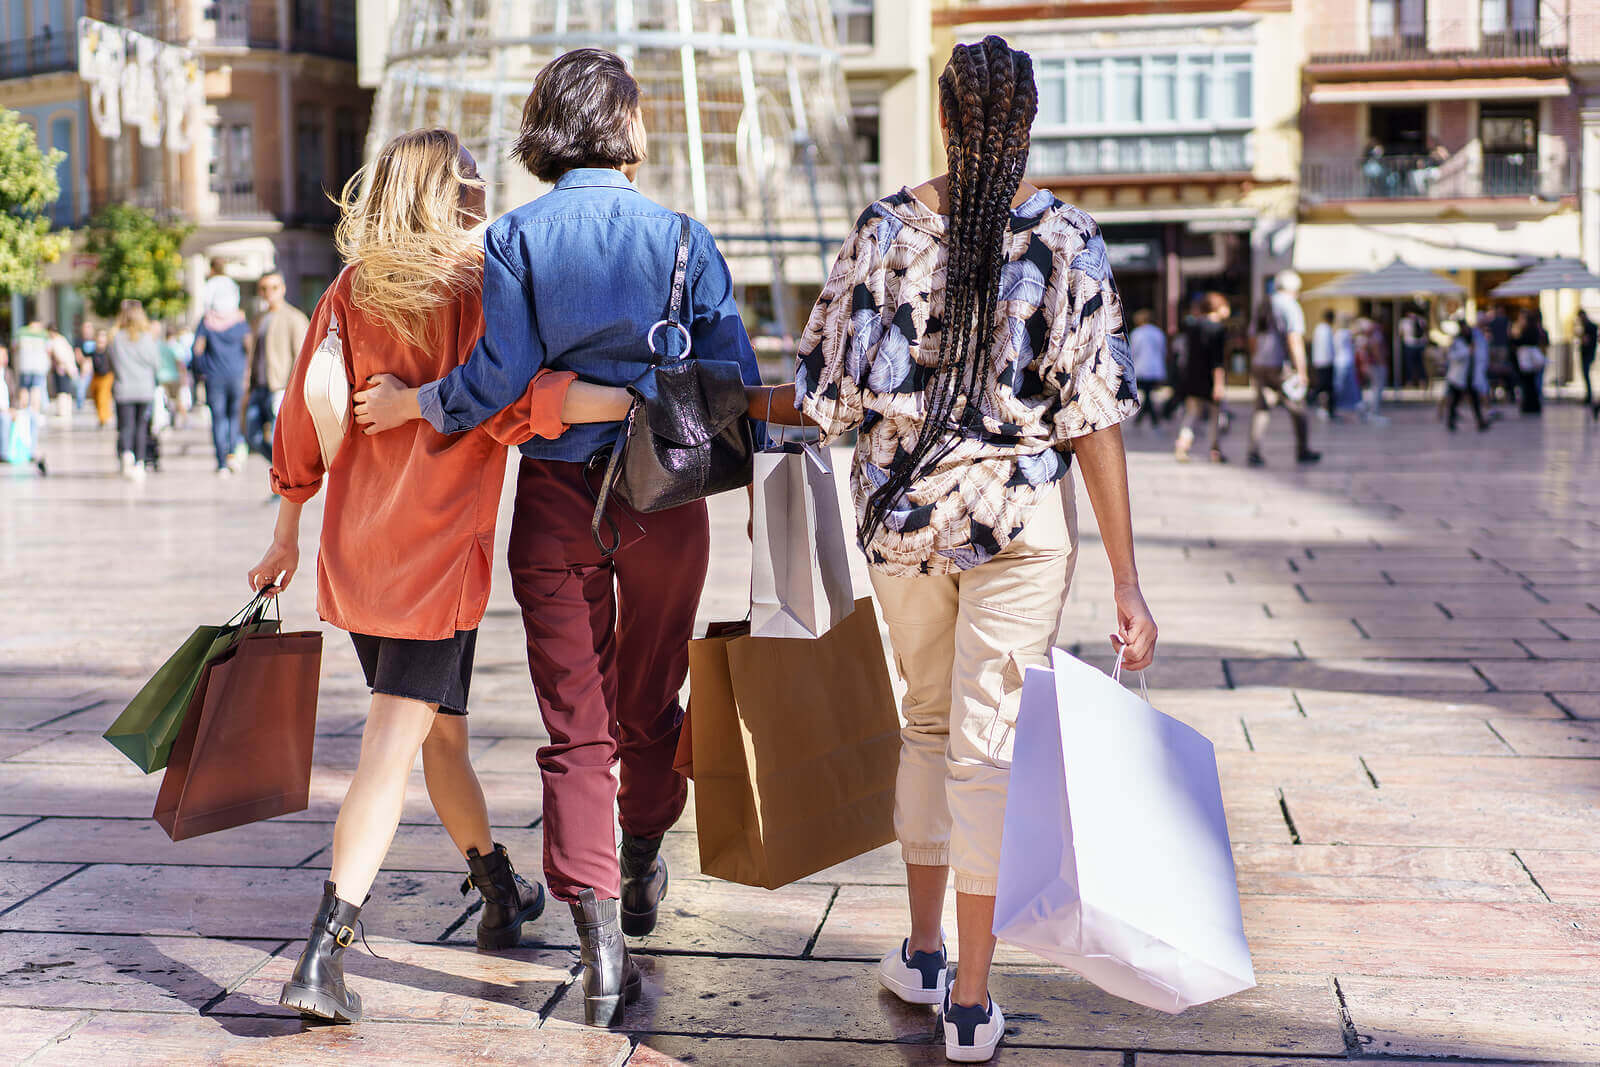 Group of three people with shopping bags in their hands. Looking to move forward from social anxiety in Evanston, IL? Begin social anxiety treatment today and learn to control your anxiety. 